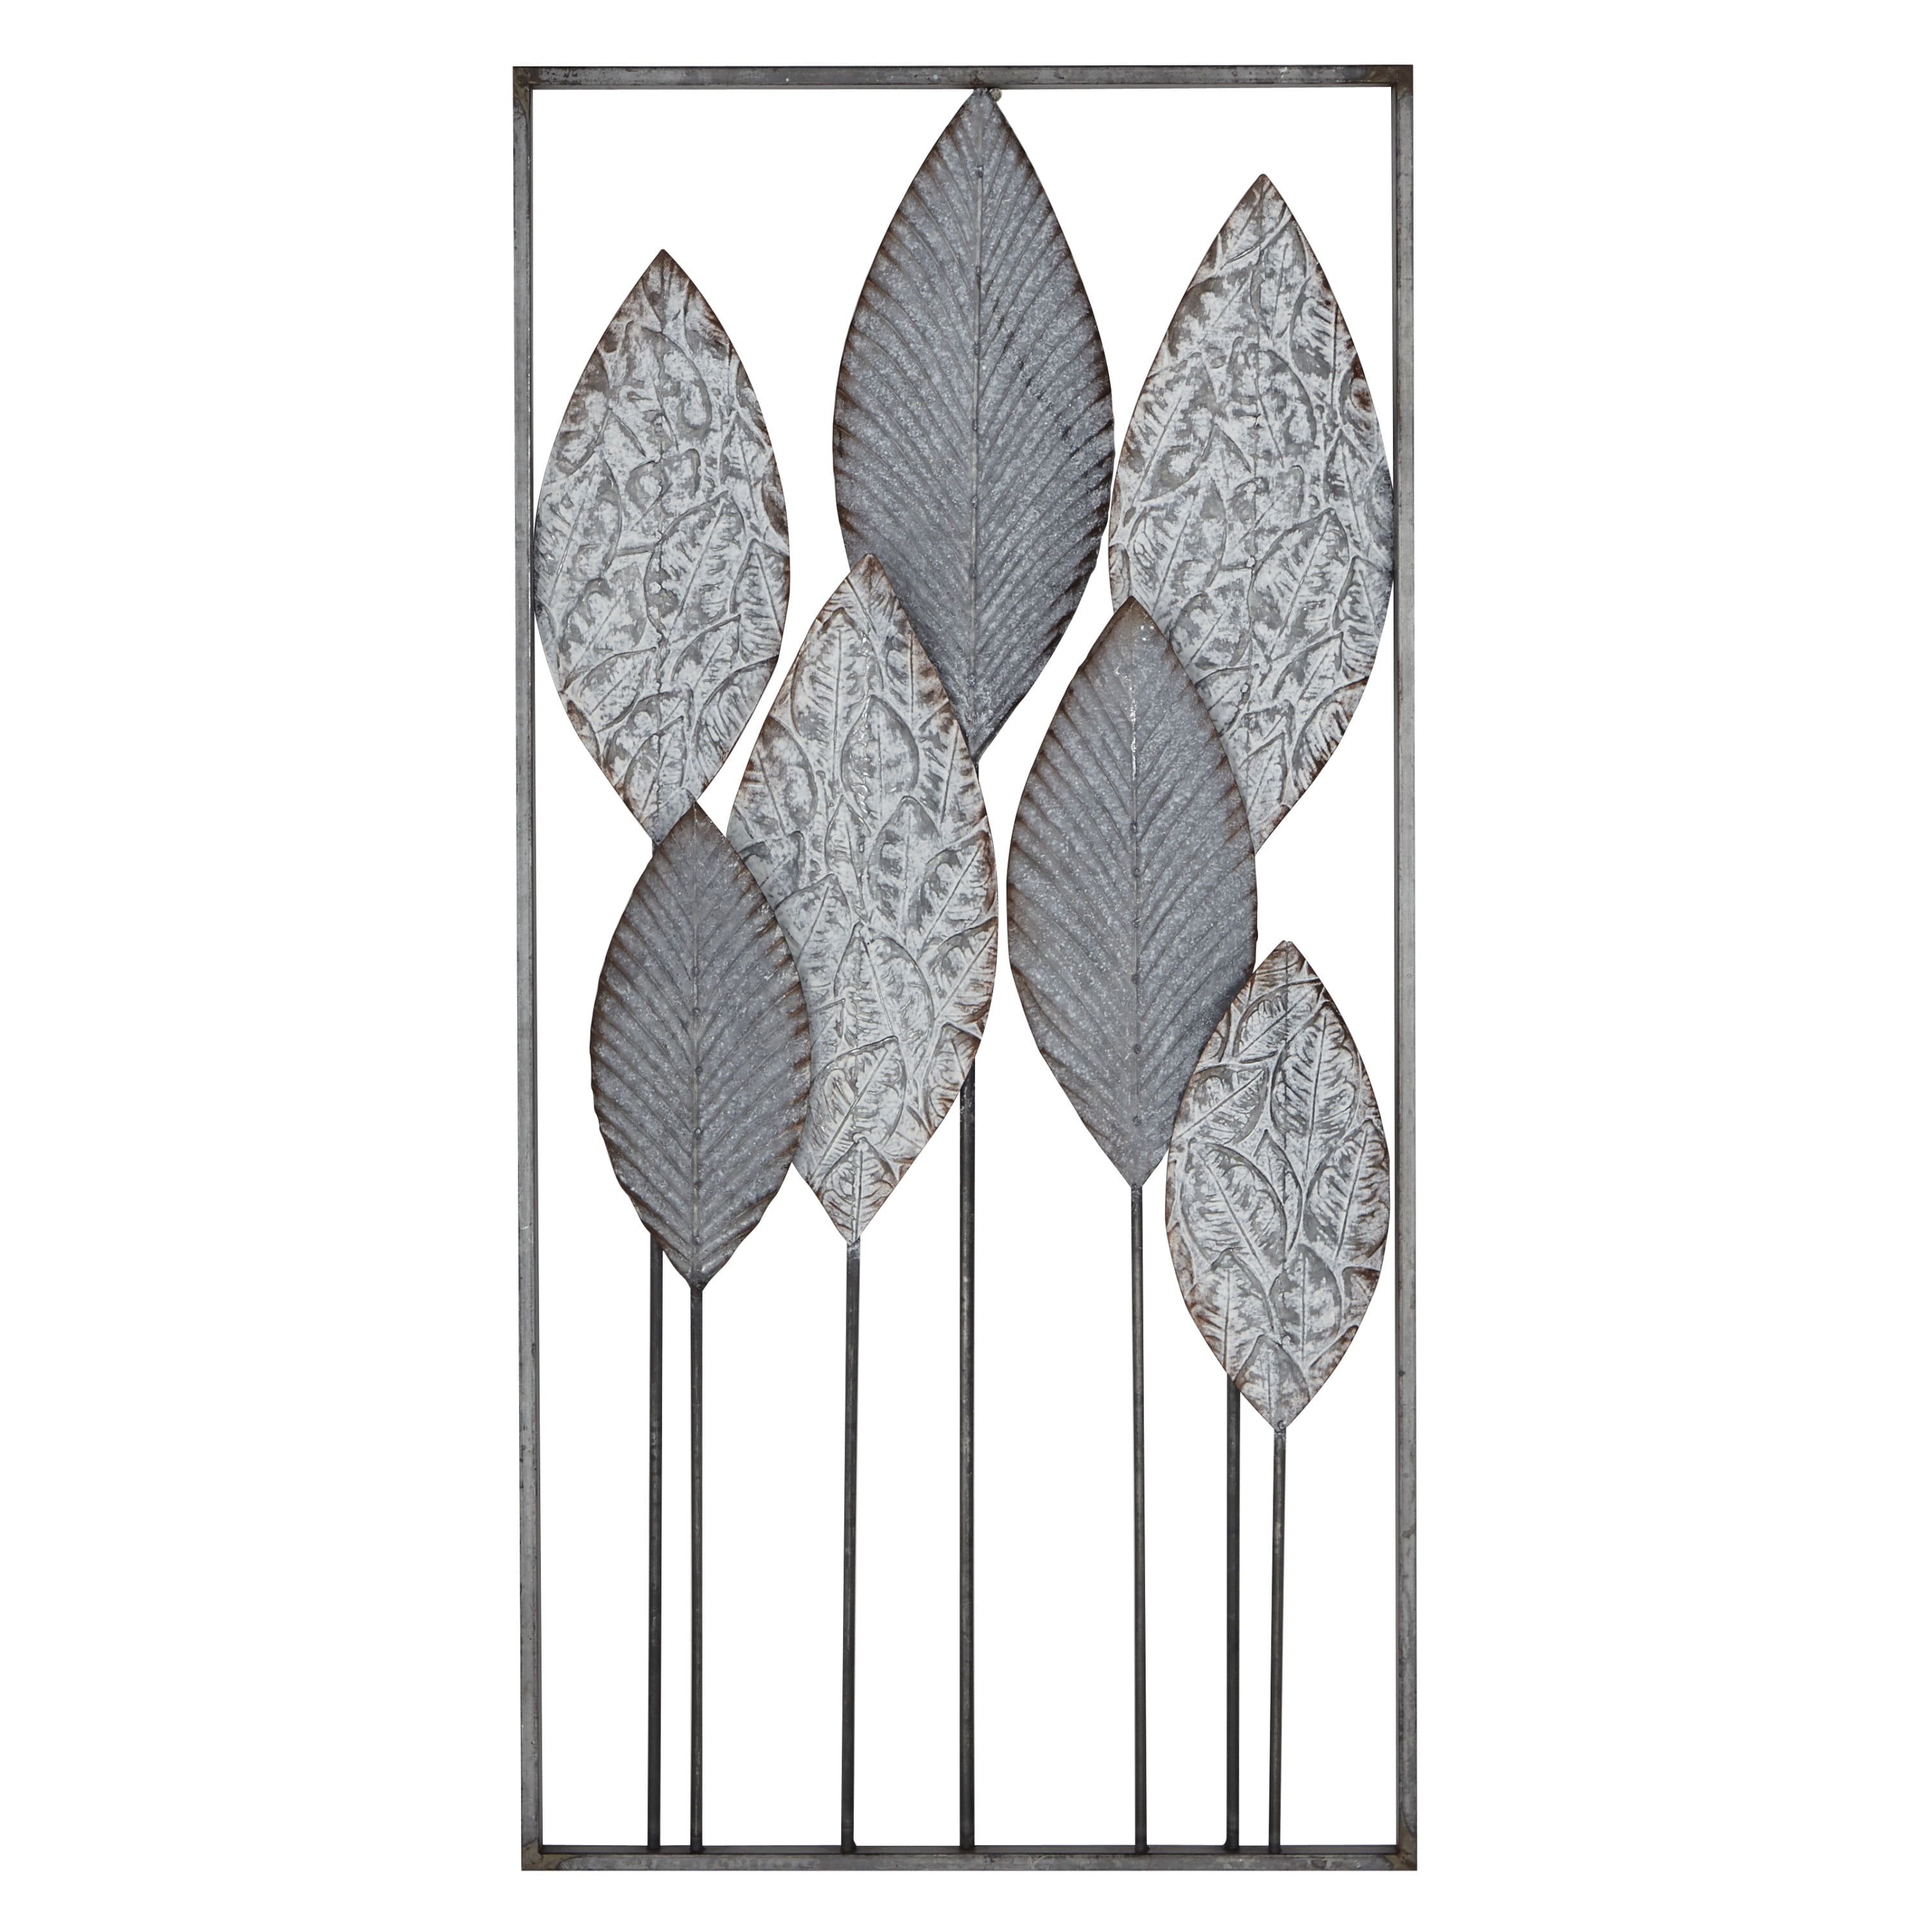 Decmode Gray Metal Tall Cut Out Leaf Wall Decor With Intricate Laser Cut  Designs – Walmart Pertaining To Intricate Laser Cut Wall Art (View 10 of 15)